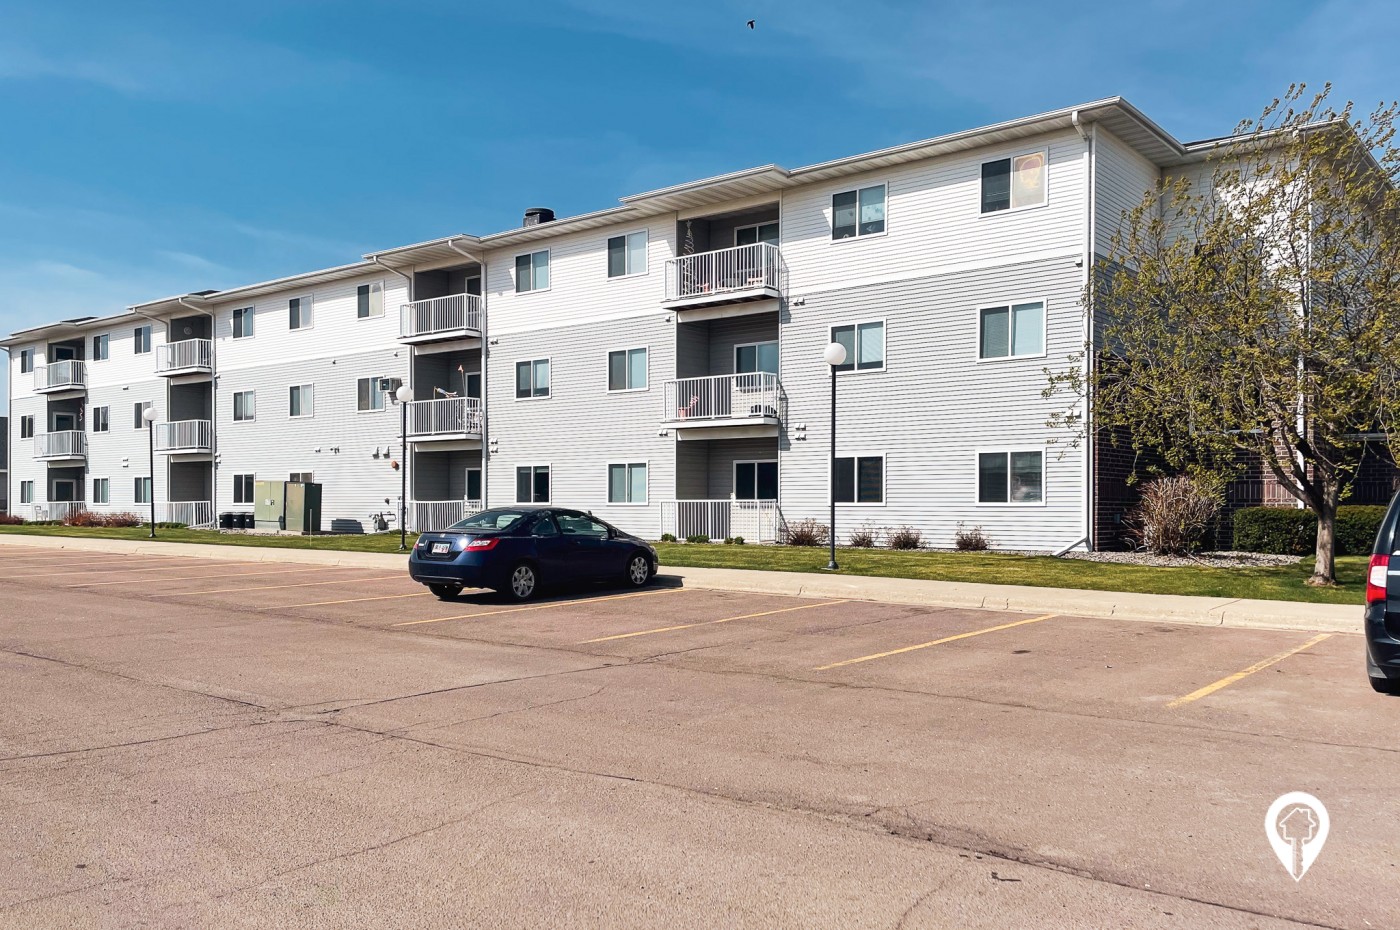 Lakewood Place Apartments